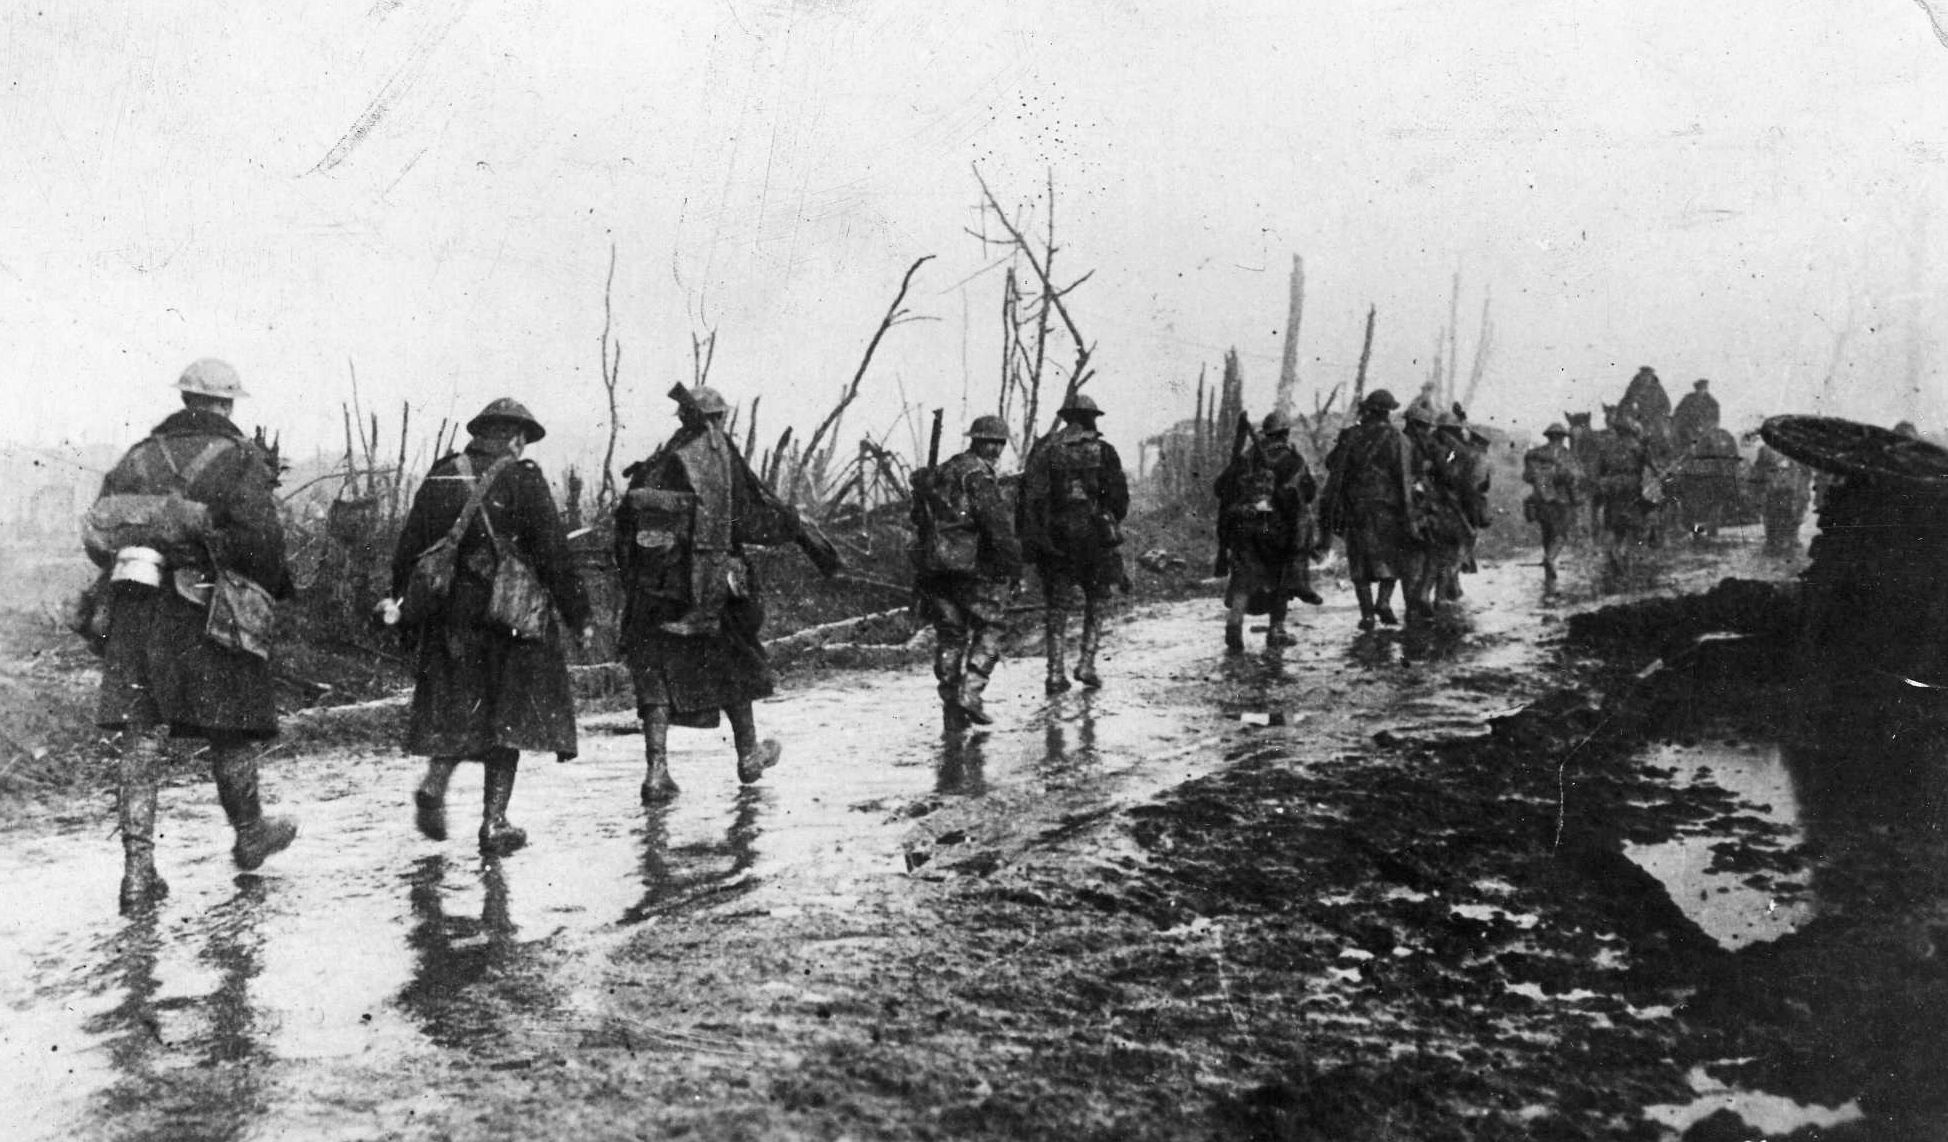 British infantry trudges through the rain toward new lines at Guillemont during the 1916 Somme campaign.